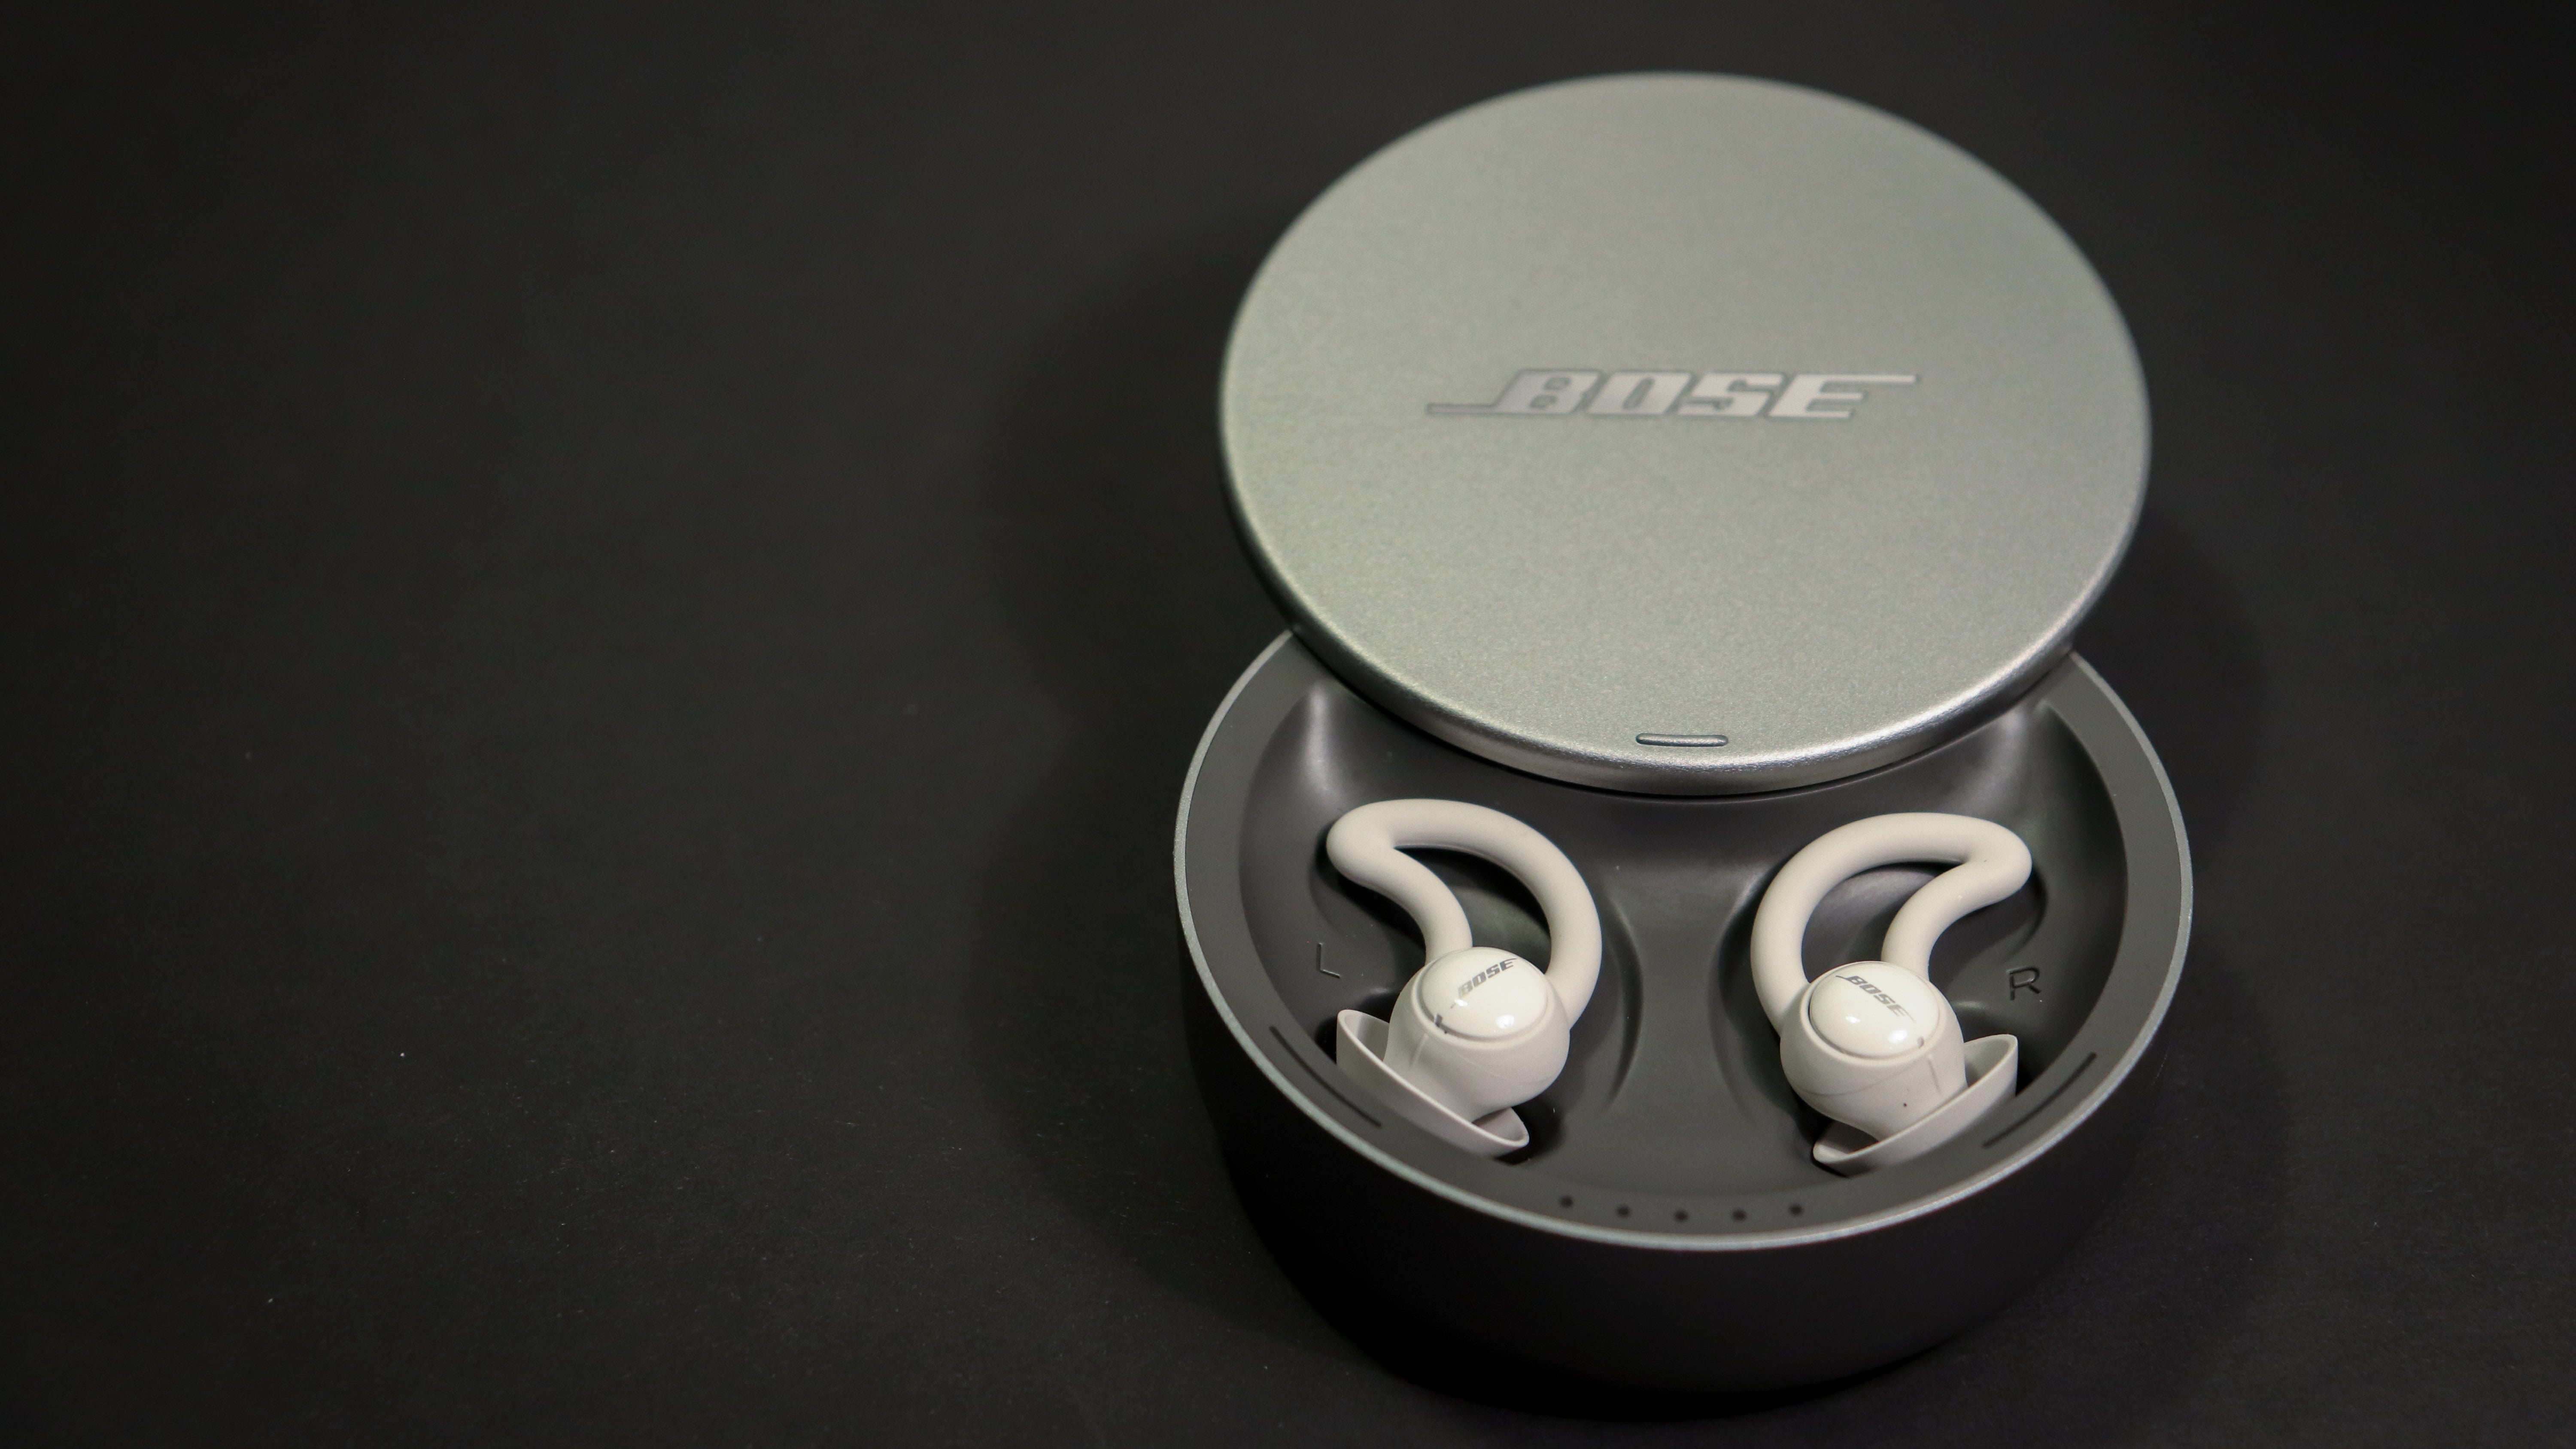 How To Get A Refund On Bose’s Discontinued Sleepbuds